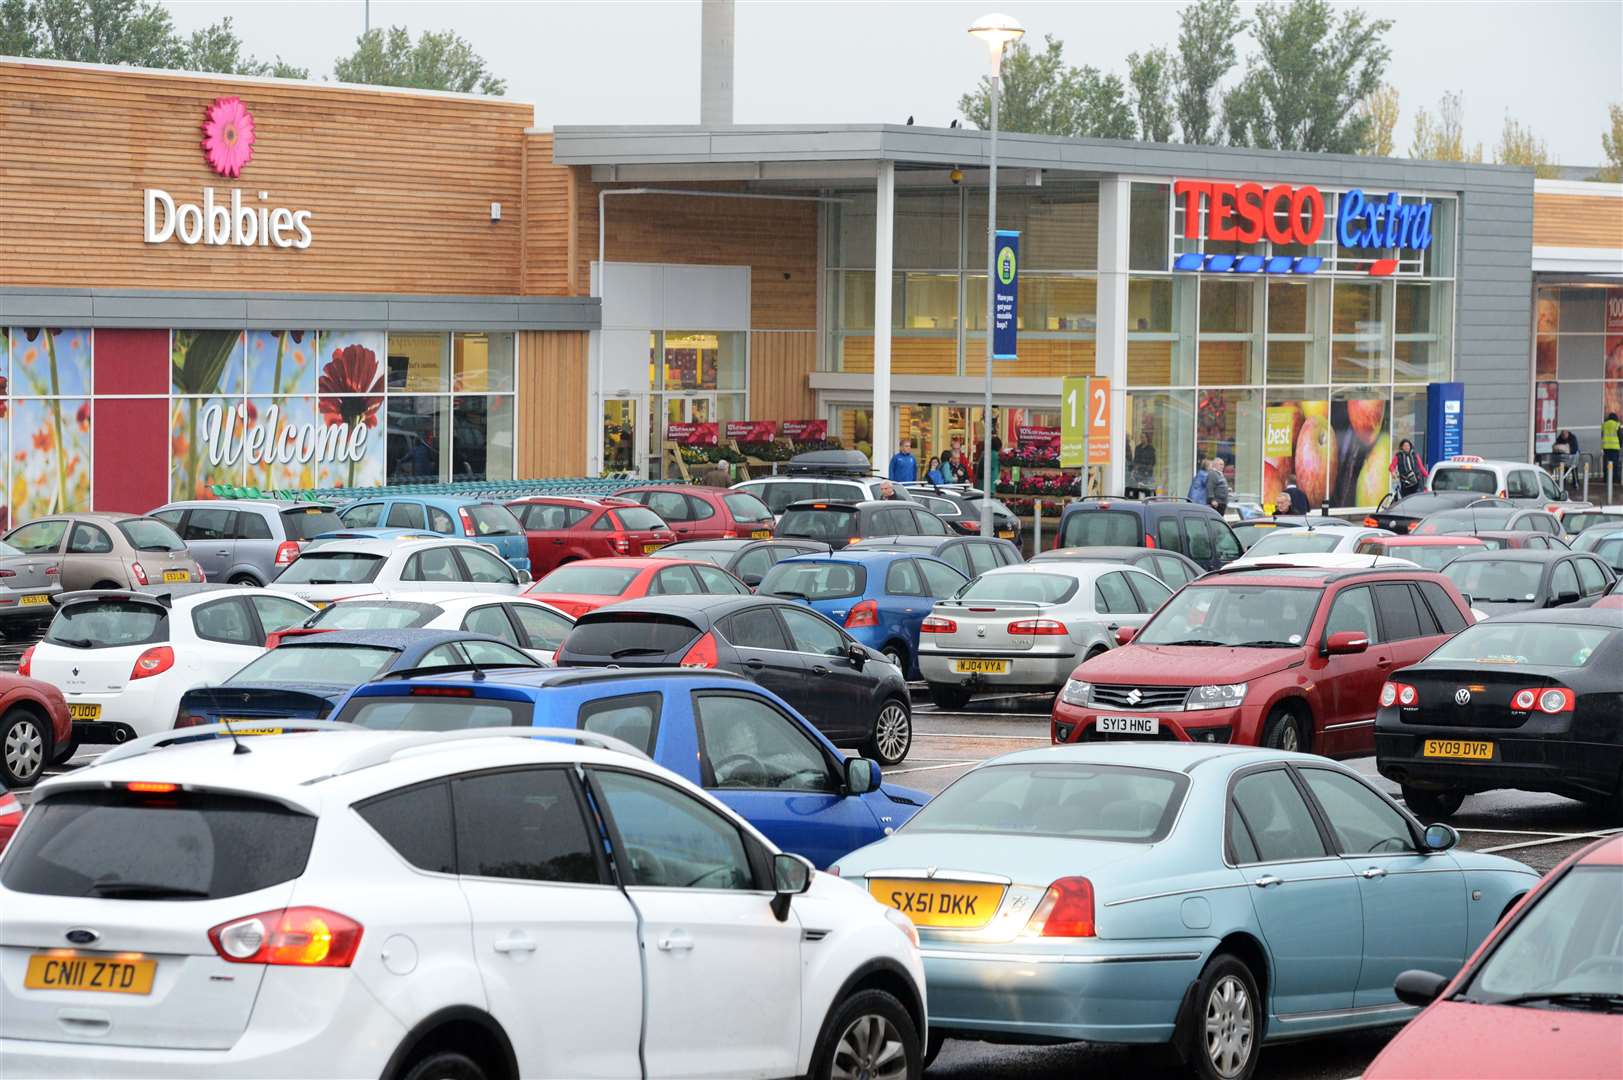 This is why Tesco Extra is changing their car parking rules